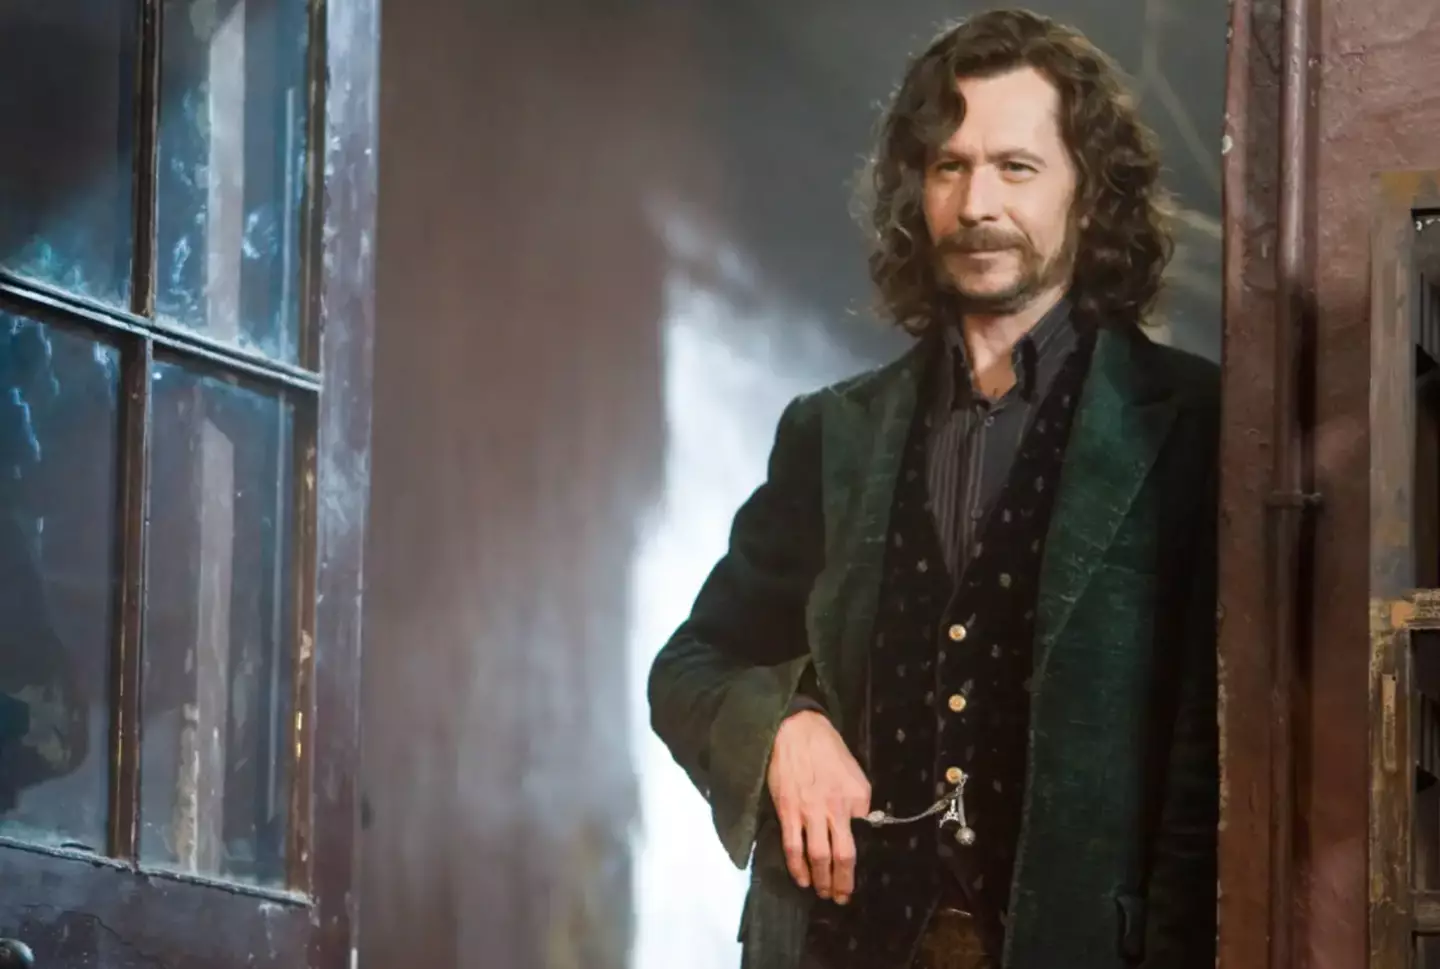 Gary Oldman is known for playing Sirius Black in the Harry Potter films (